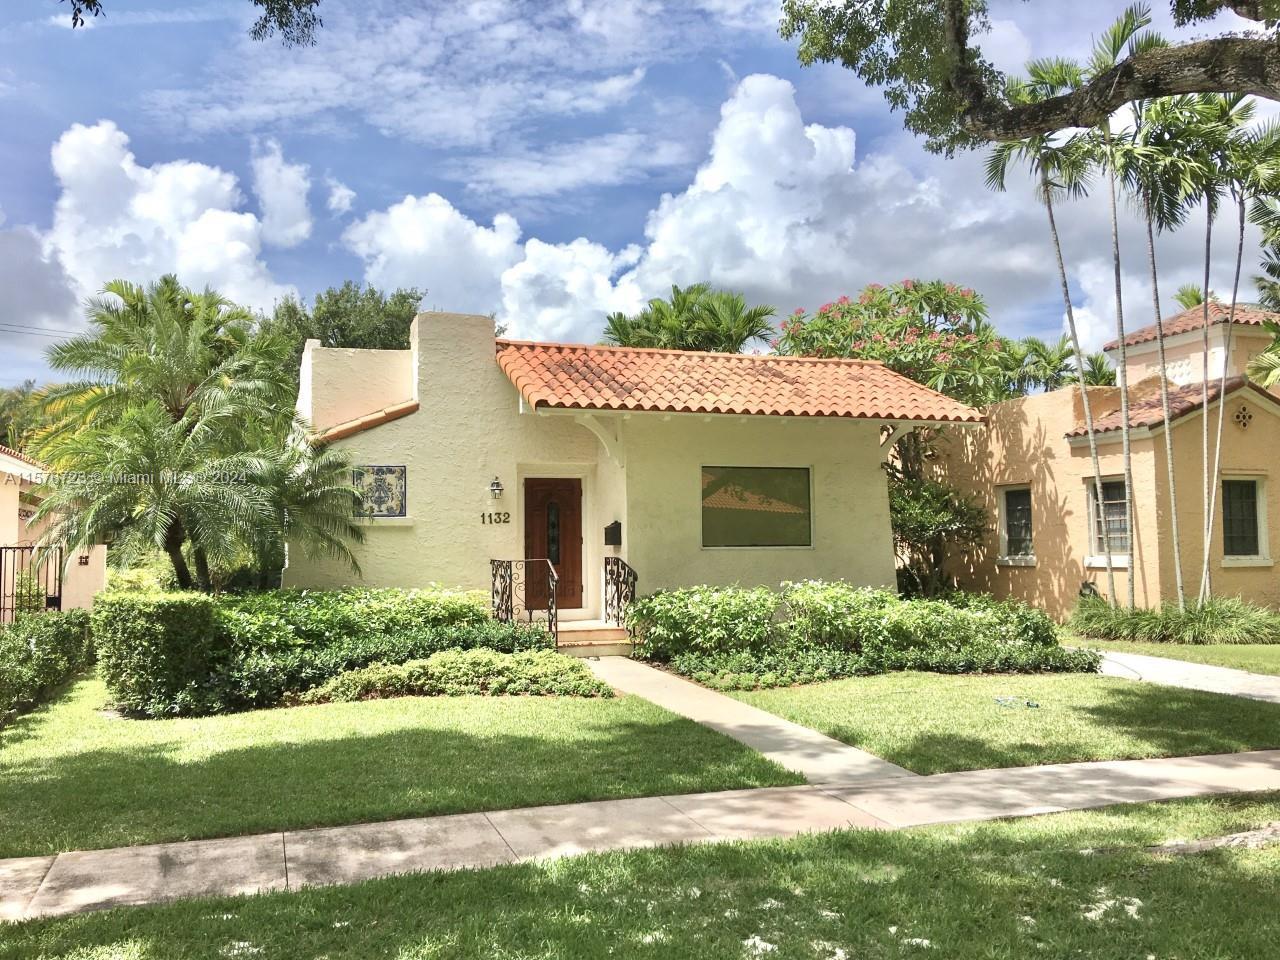 Situated in a PRIME location, on a beautiful, tree lined street in Coral Gables, this historic home 